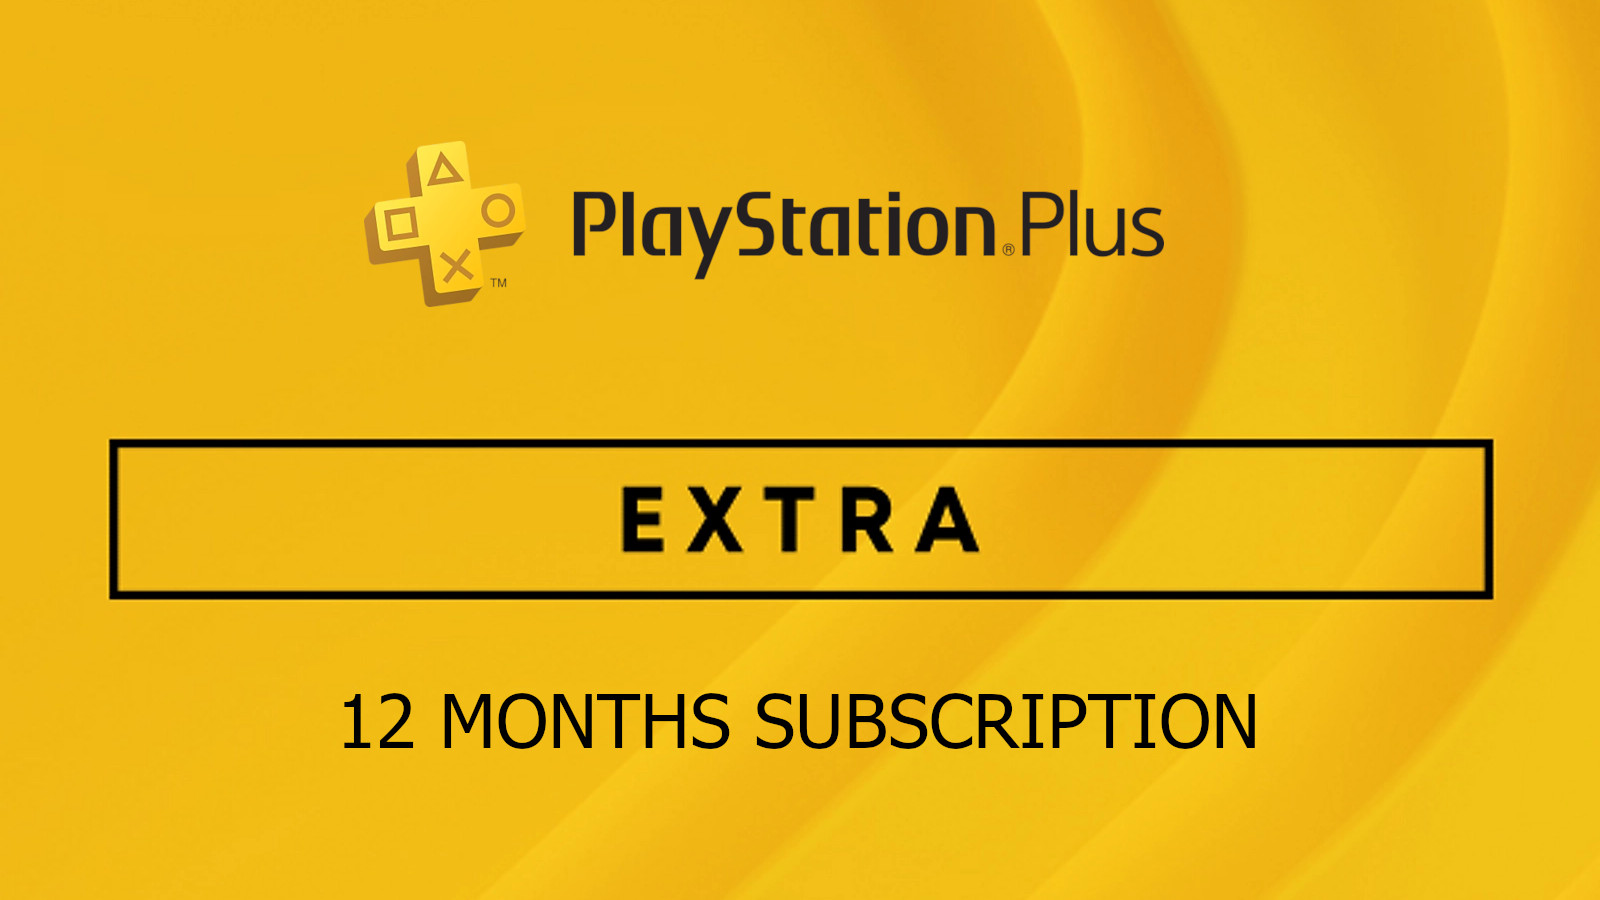 PlayStation Plus Extra 12 Months Subscription ACCOUNT 94.23 usd